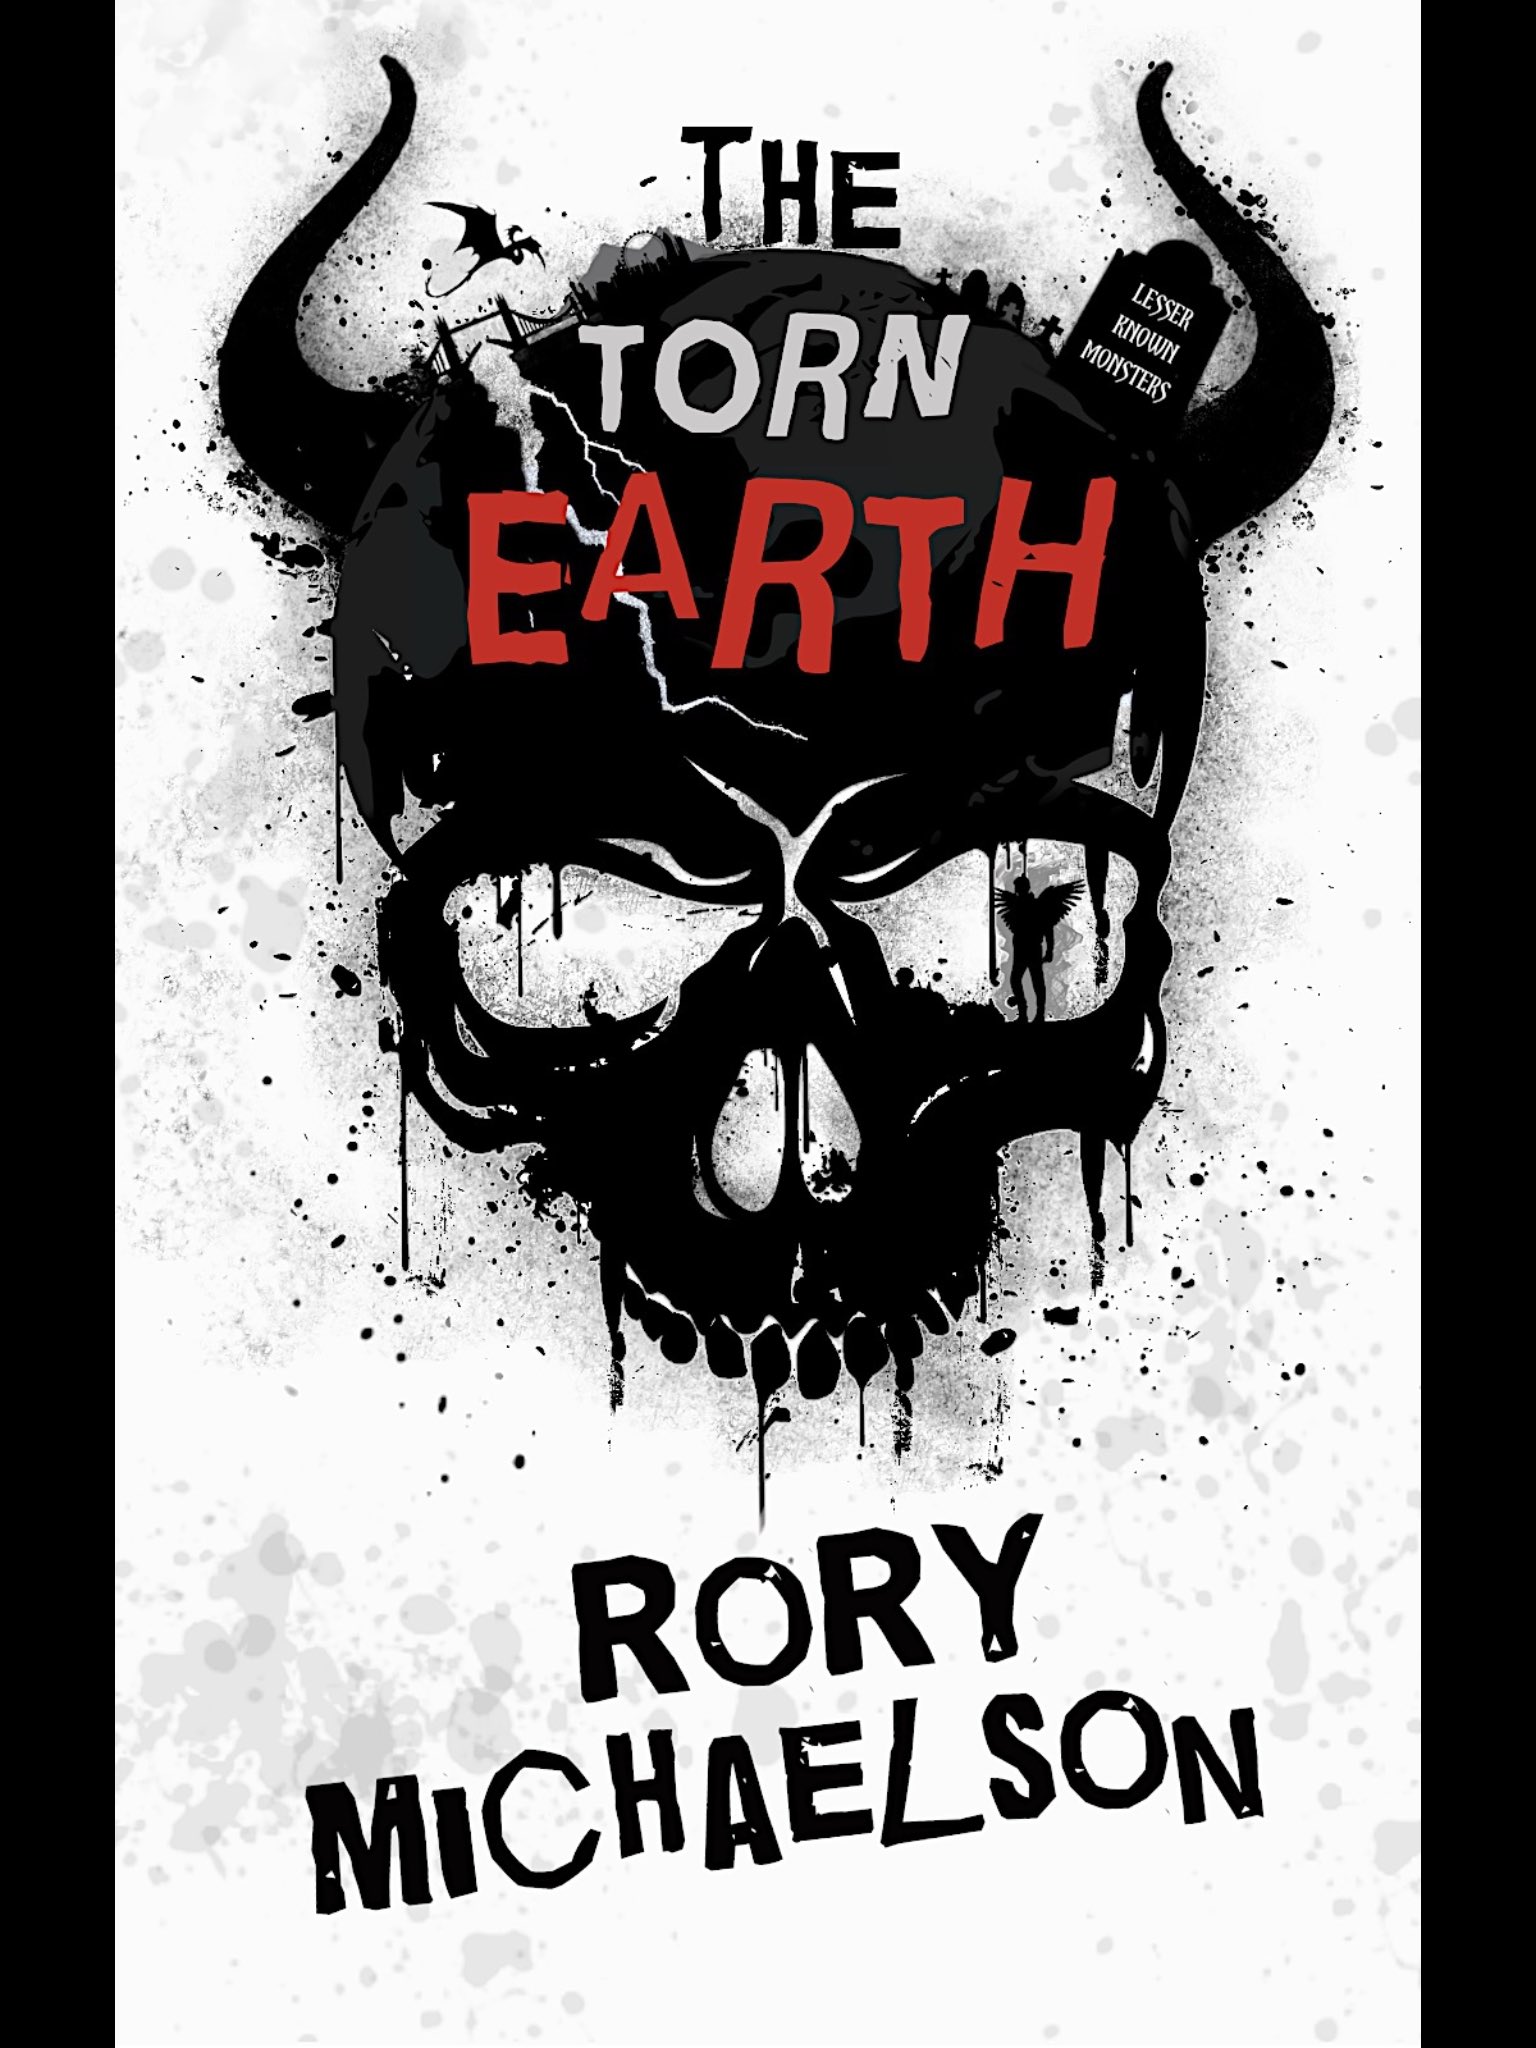 The Torn Earth by Rory Michaelson